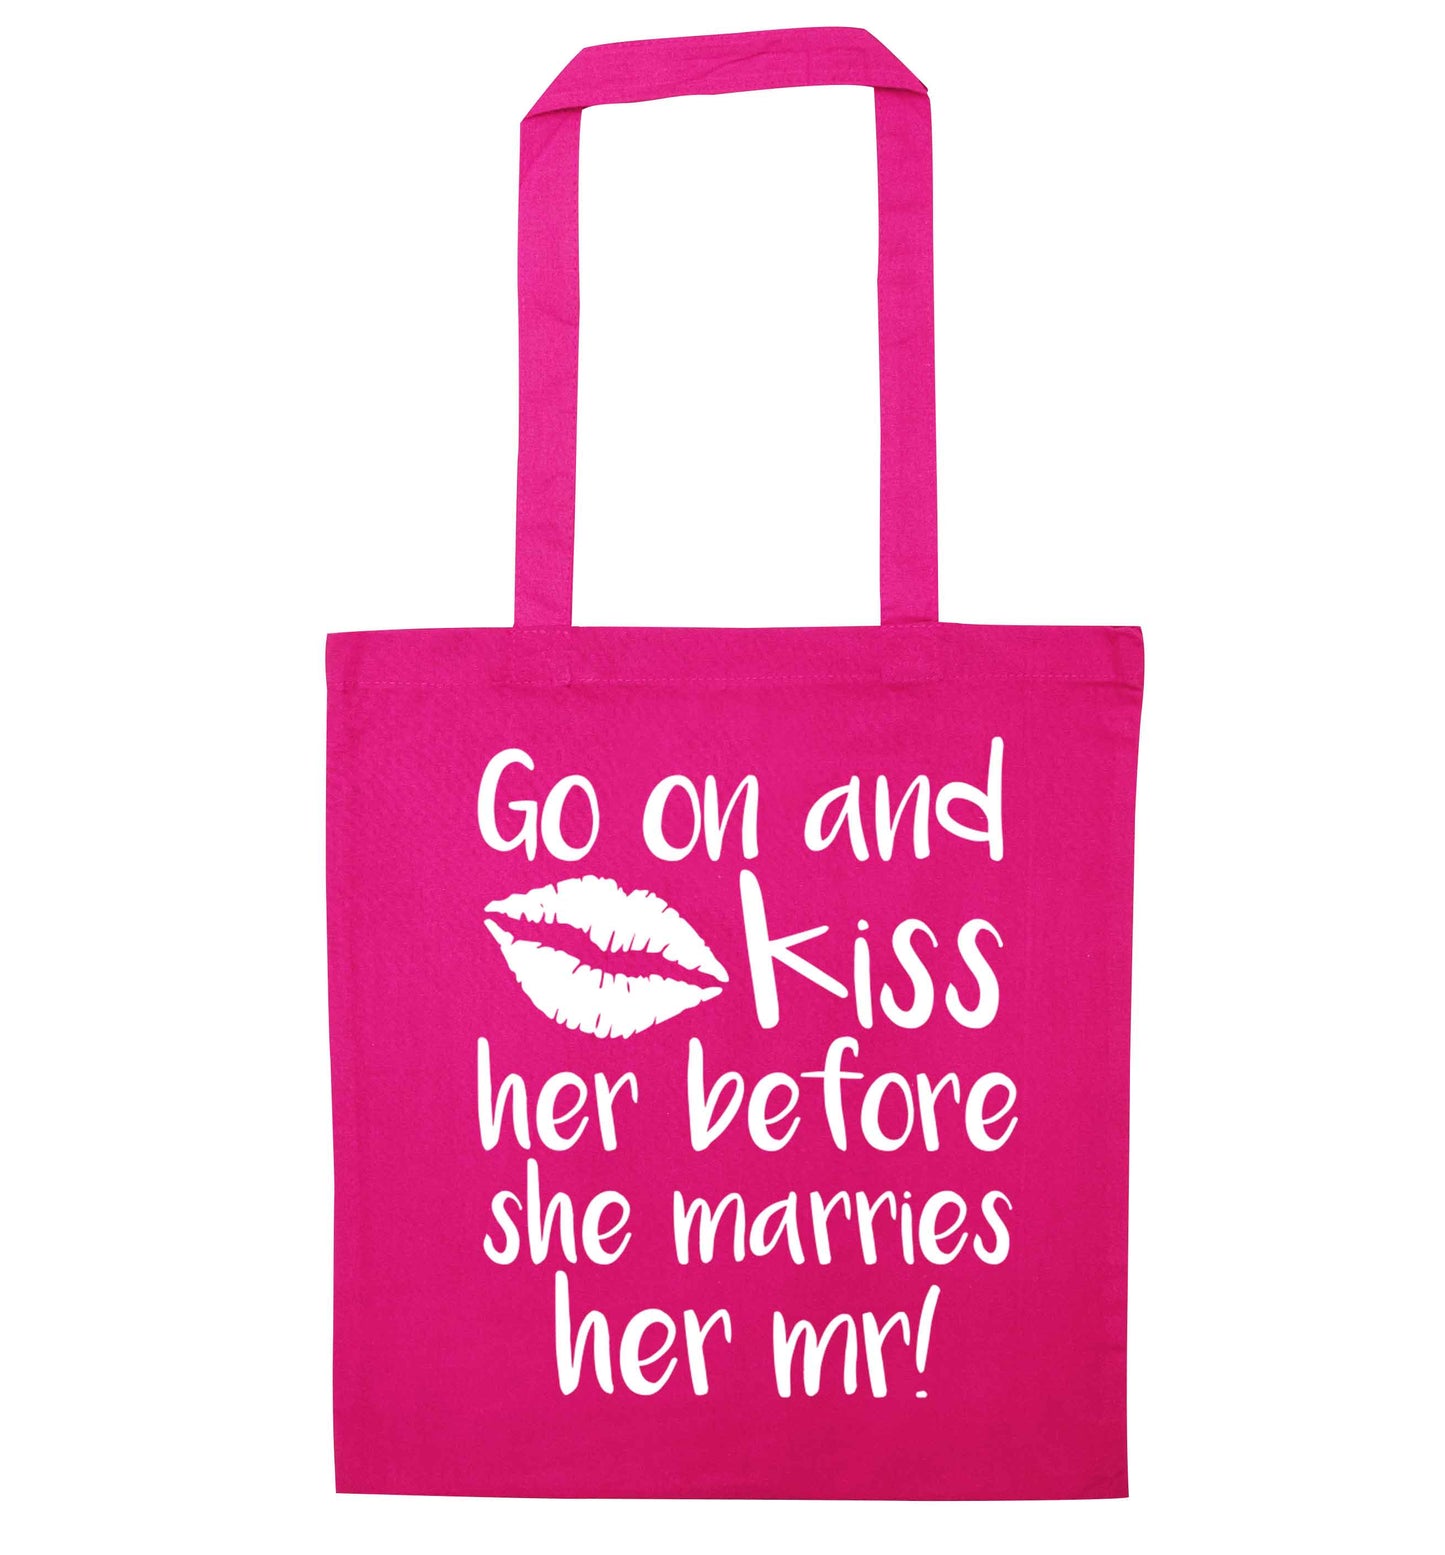 Kiss her before she marries her mr! pink tote bag